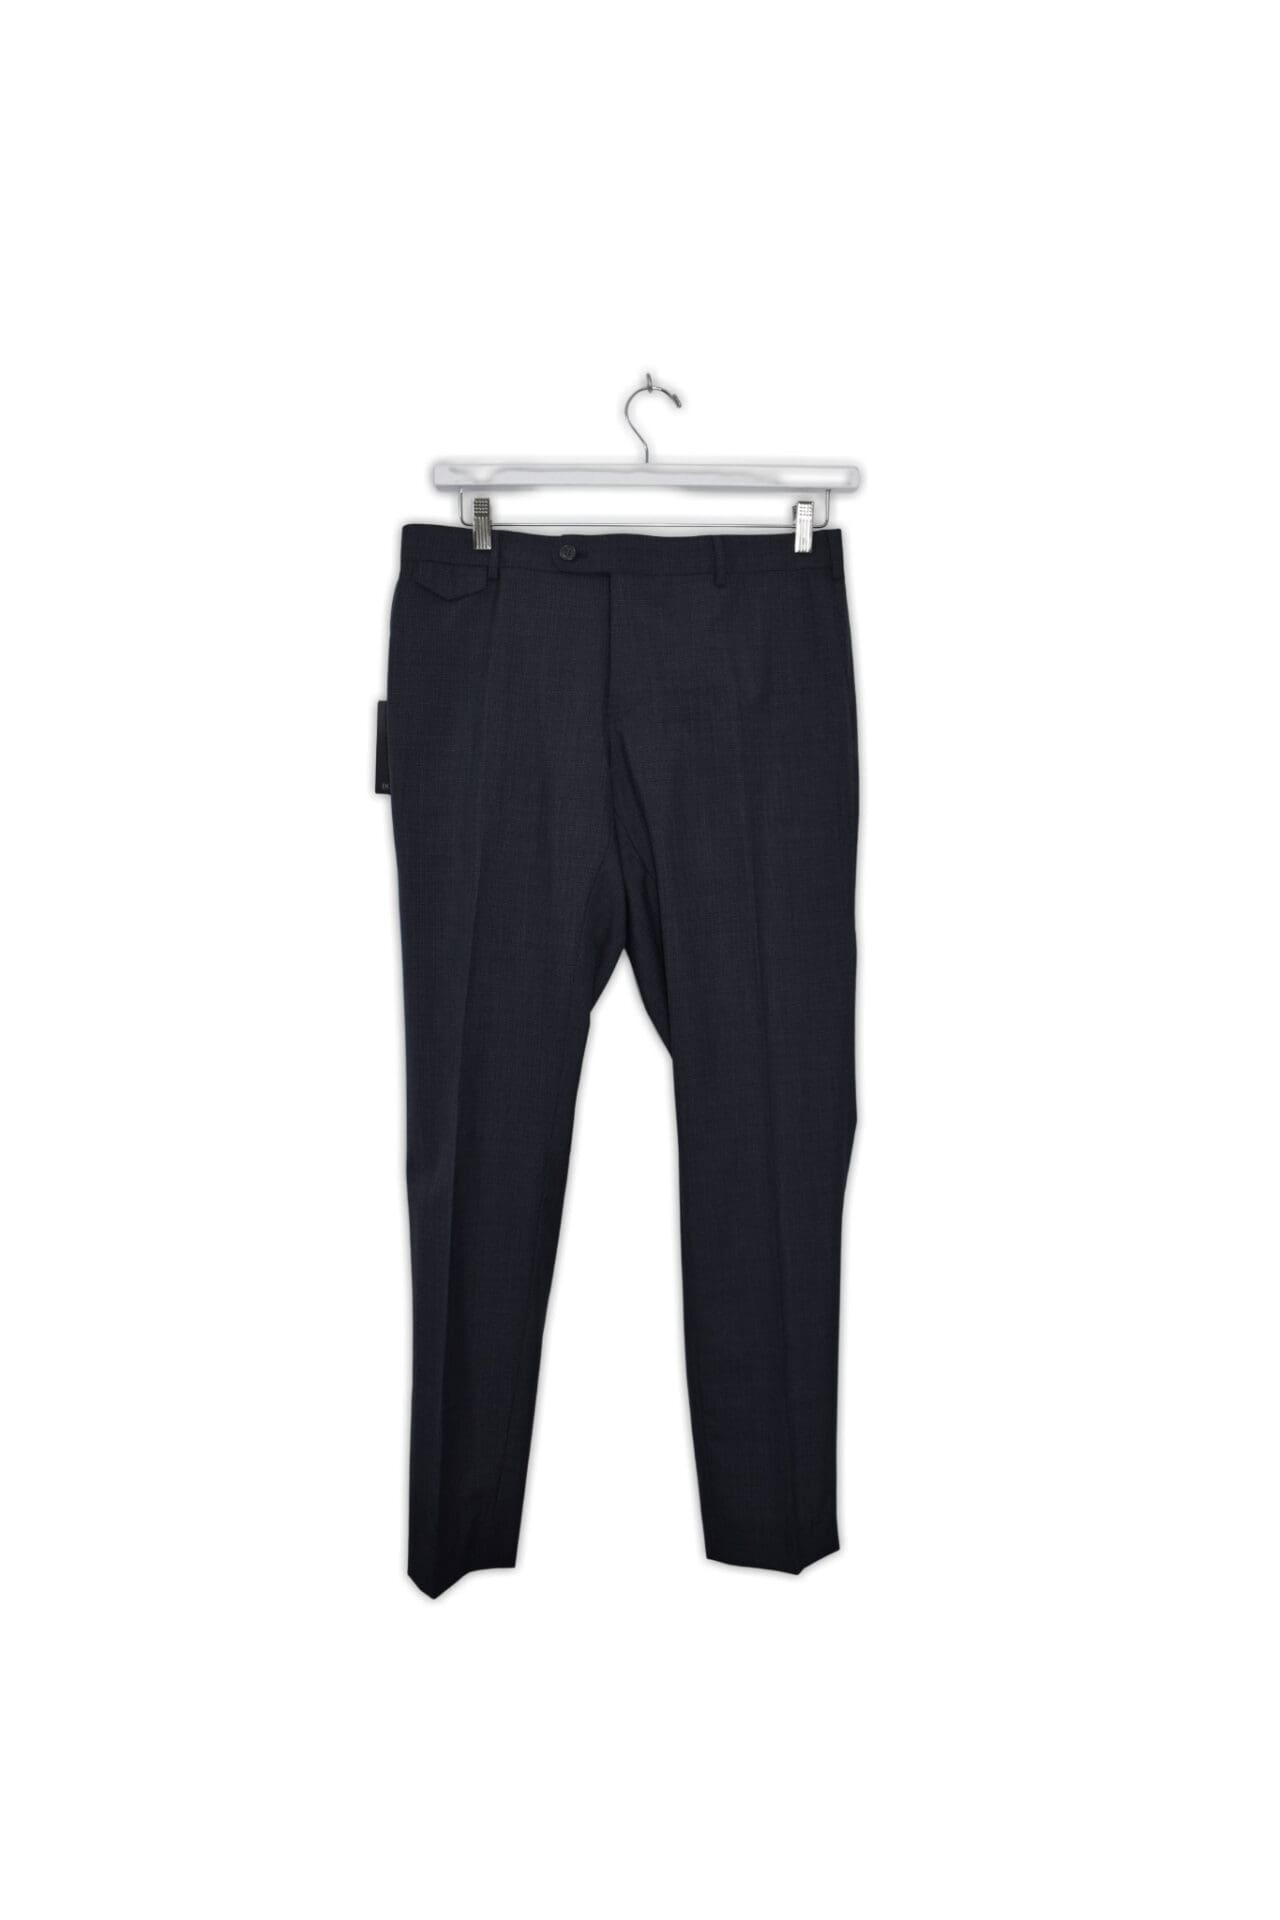 Classic tapered trouser